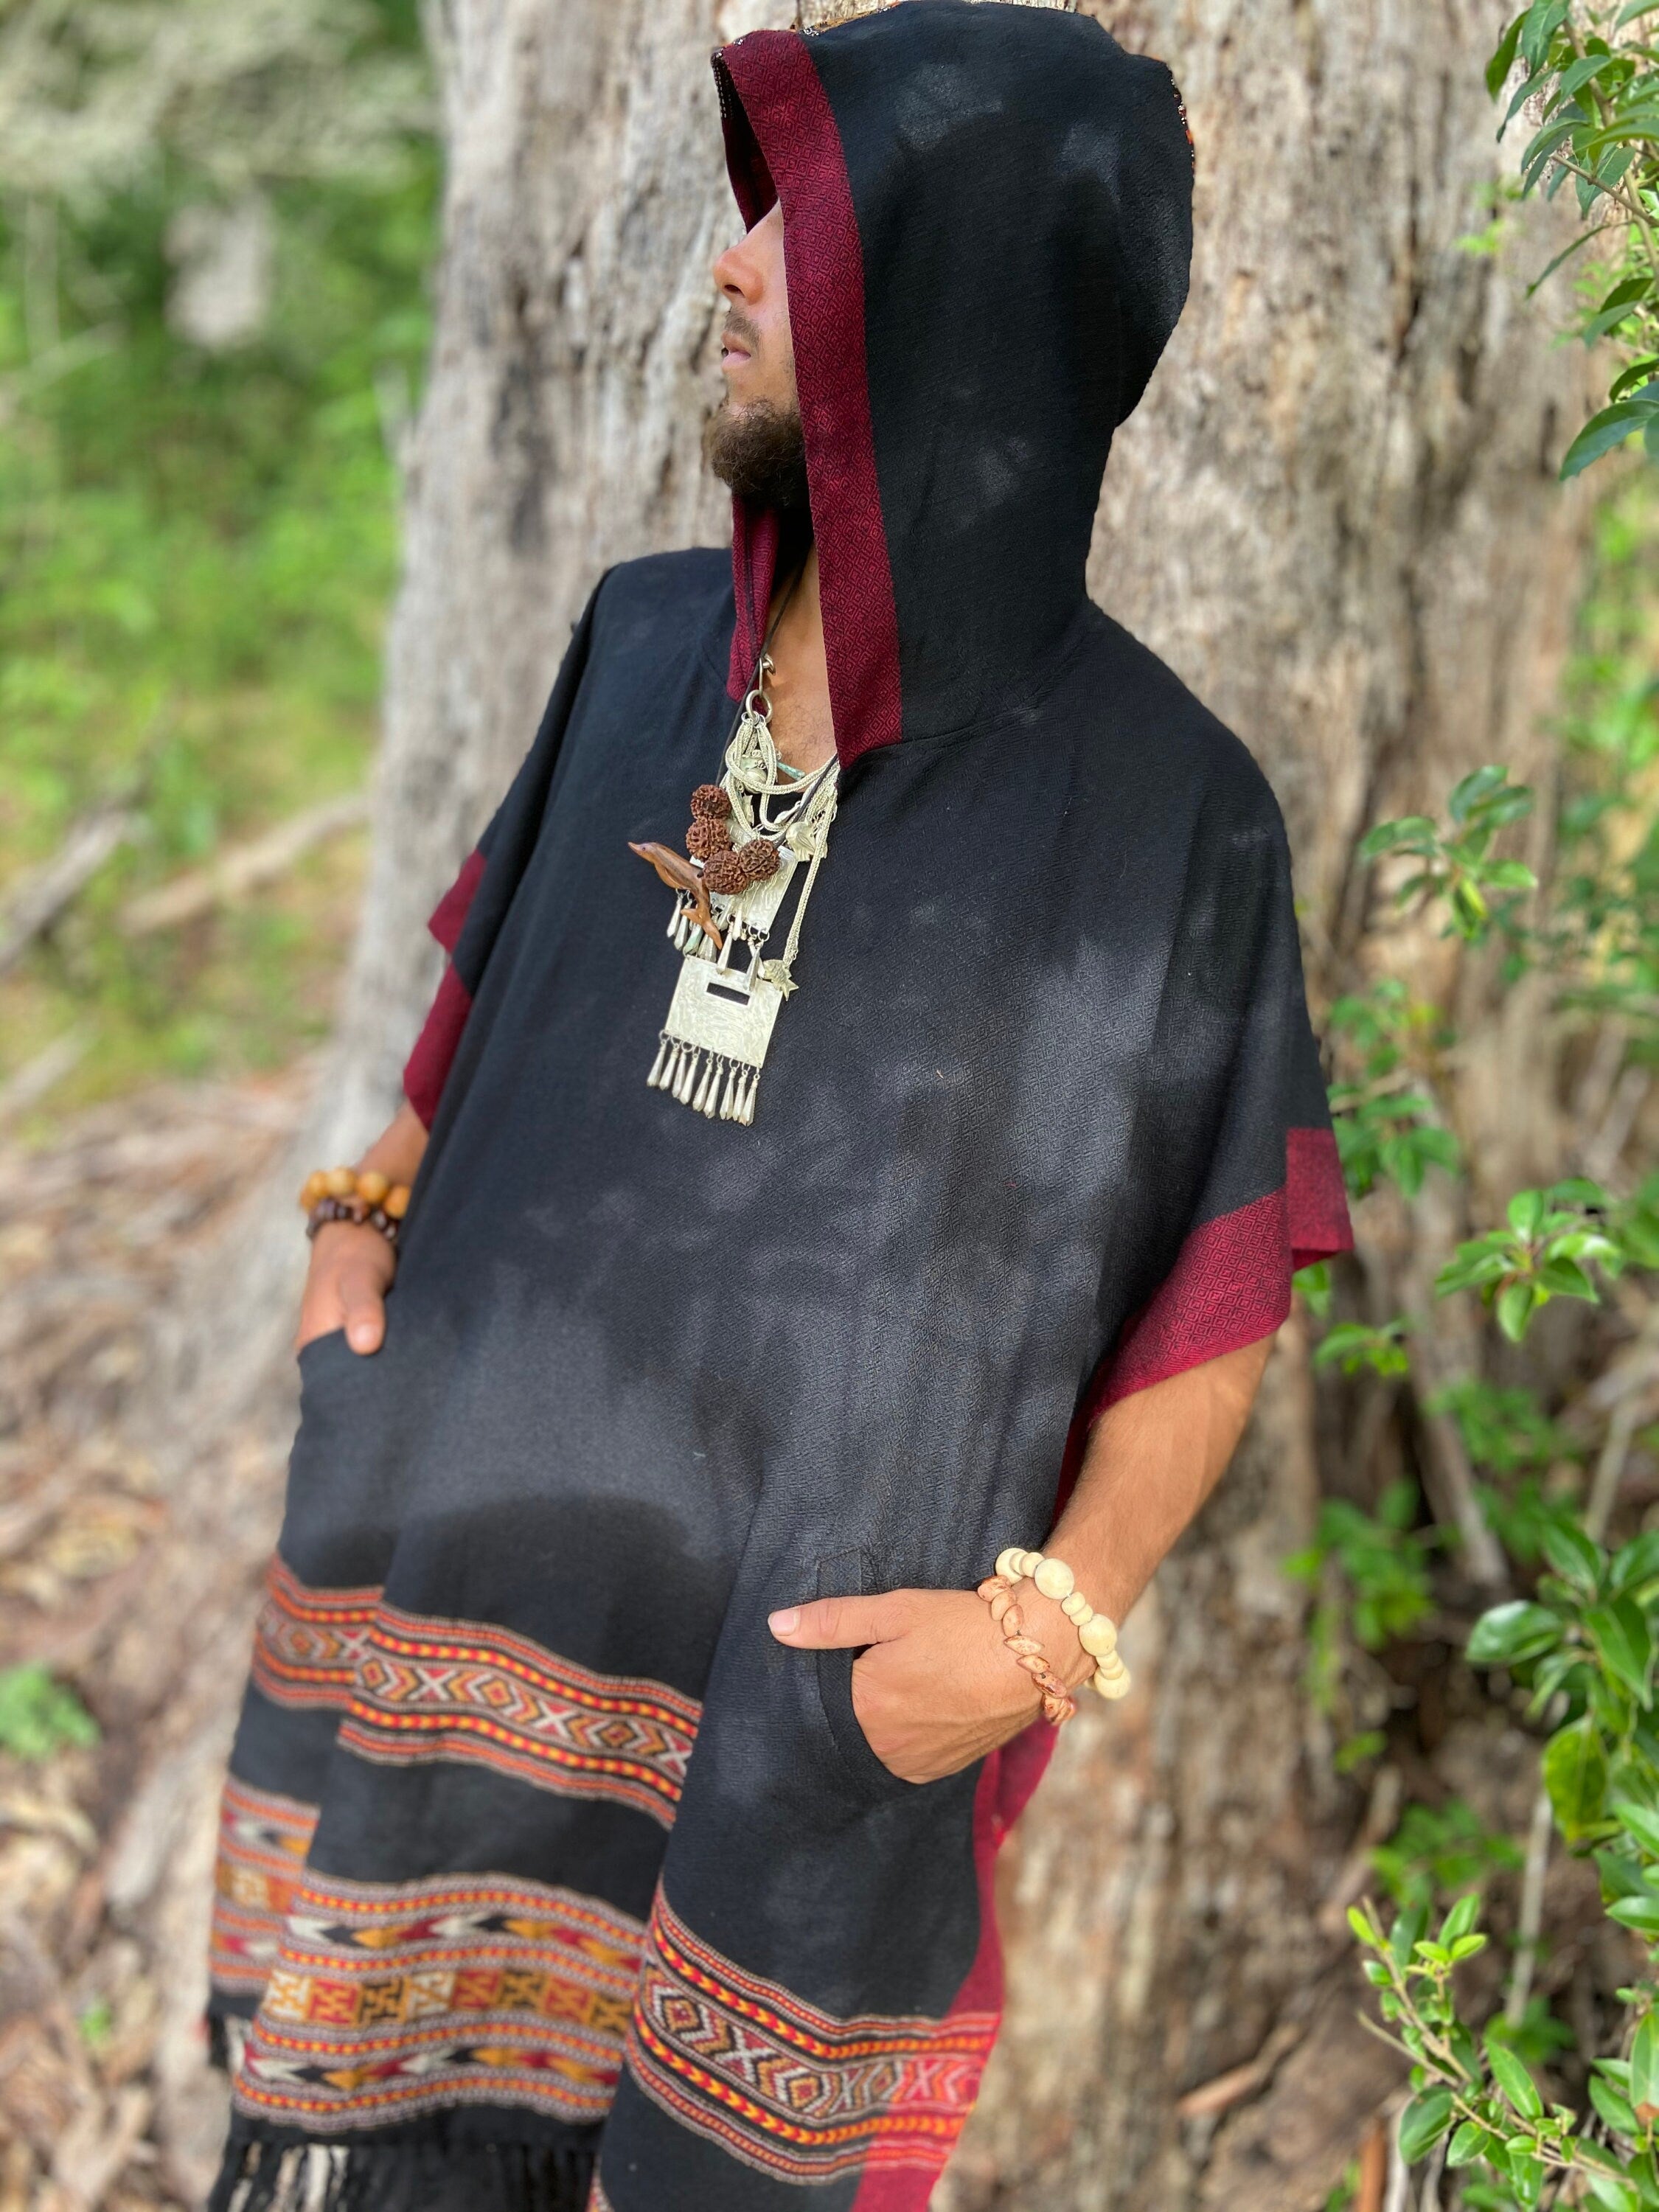 SAMADHI Mens Hooded Poncho Long Black YAK Wool and Acrylic Wool Blend with Tribal Embroidery Large Hood Pockets Primitive Mexican AJJAYA